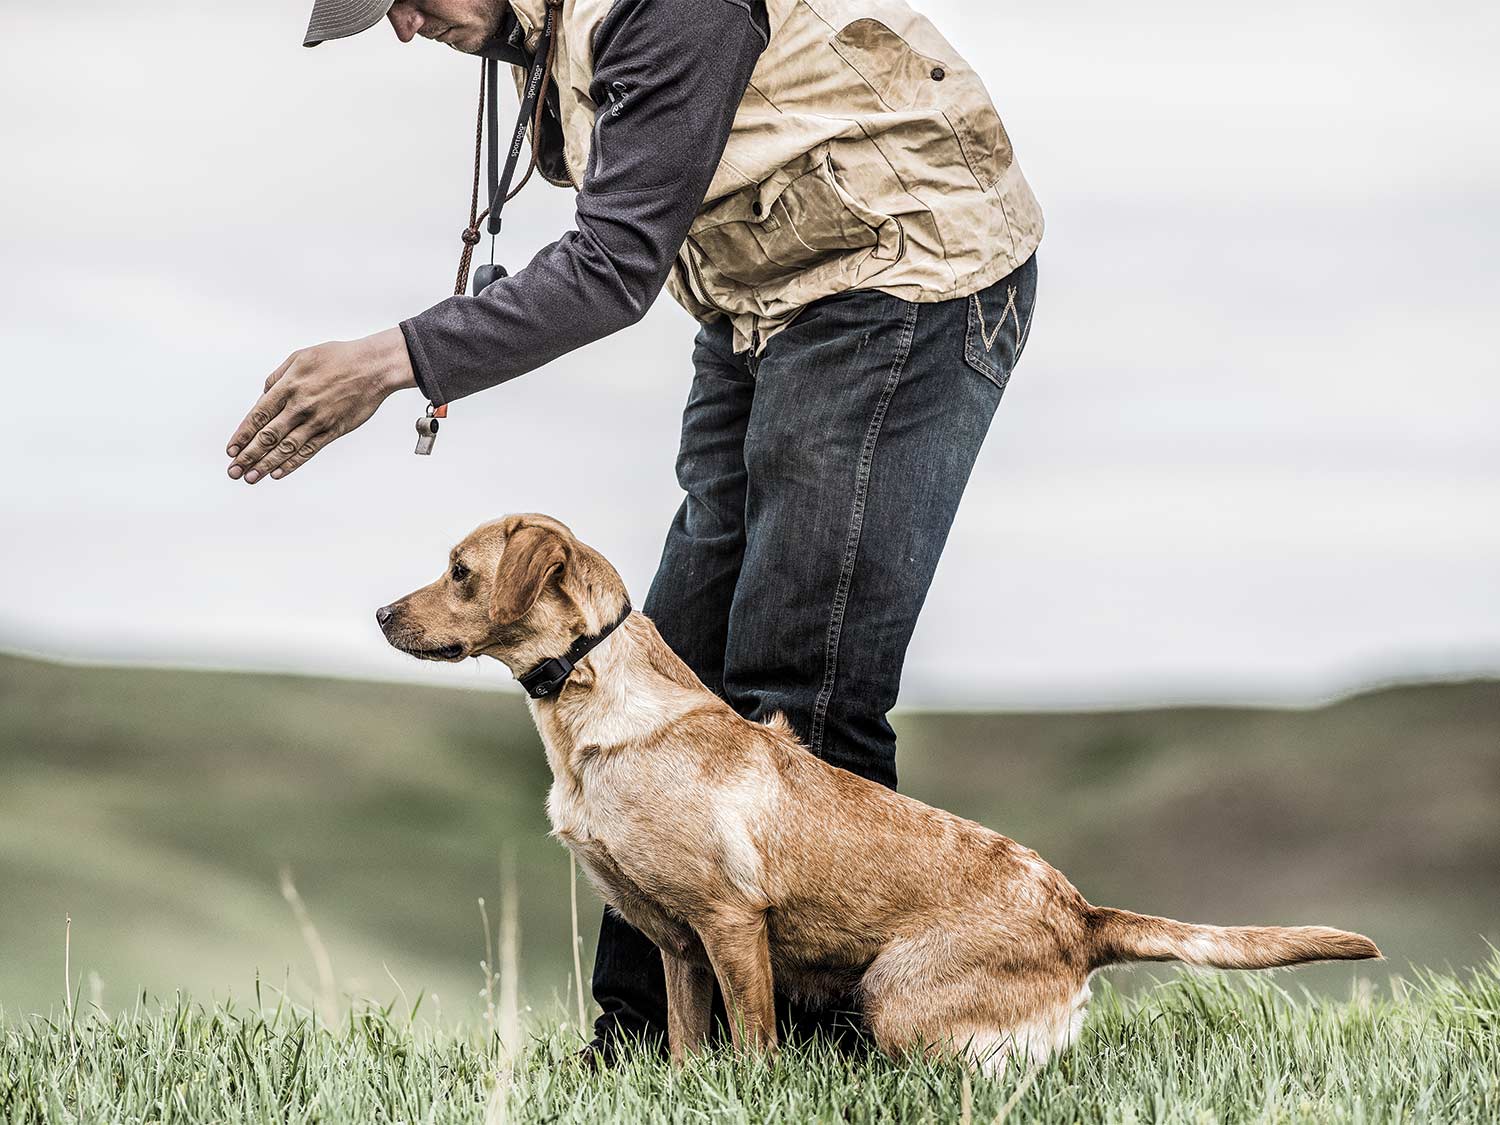 A hunting dog trainer lines up a dog for a blind retrieve in a large open field.